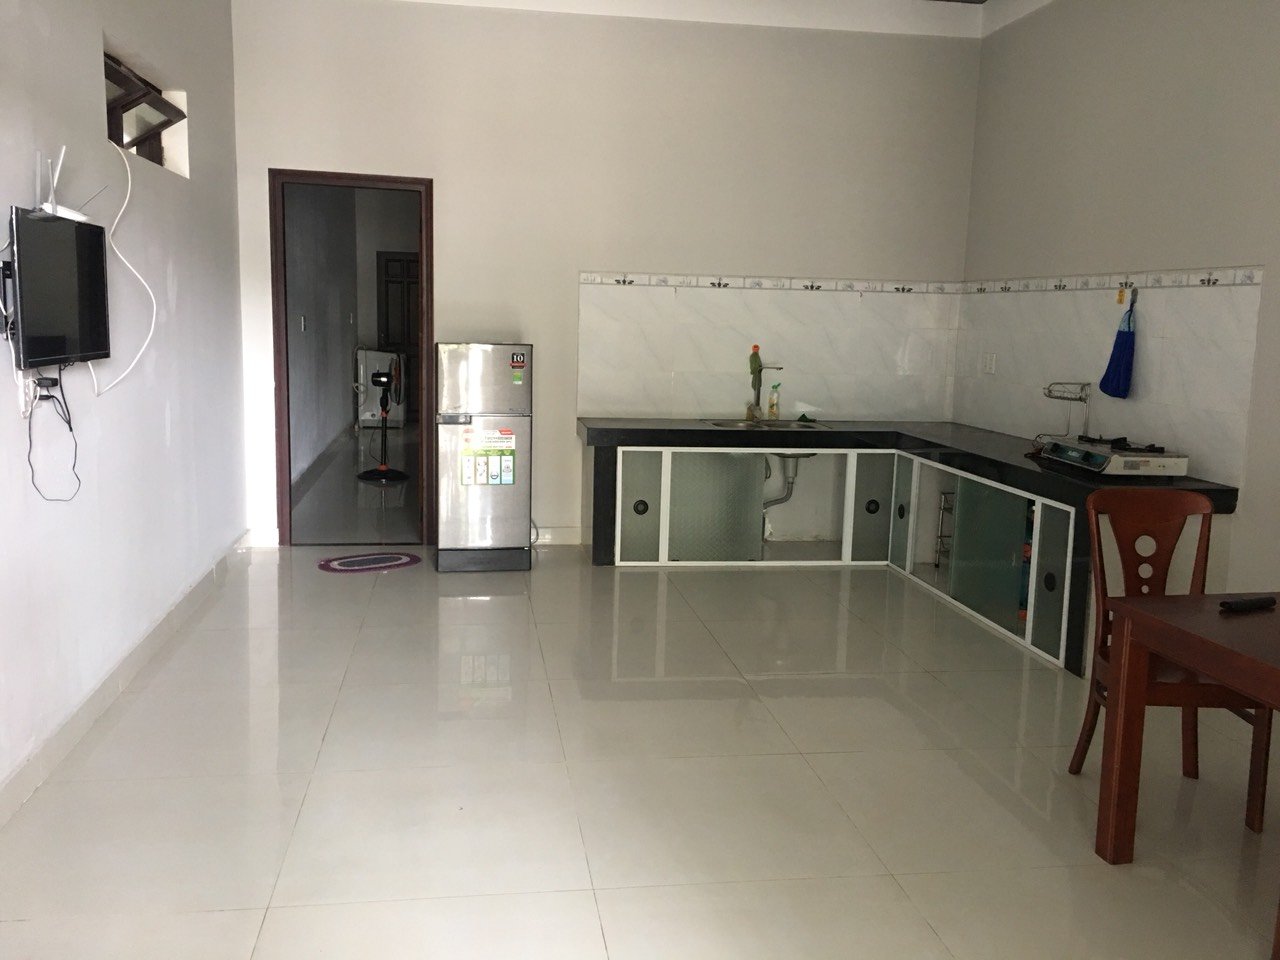 Budget One Bedrooms Apartment For Rent By The An Bang Beach Hoi An